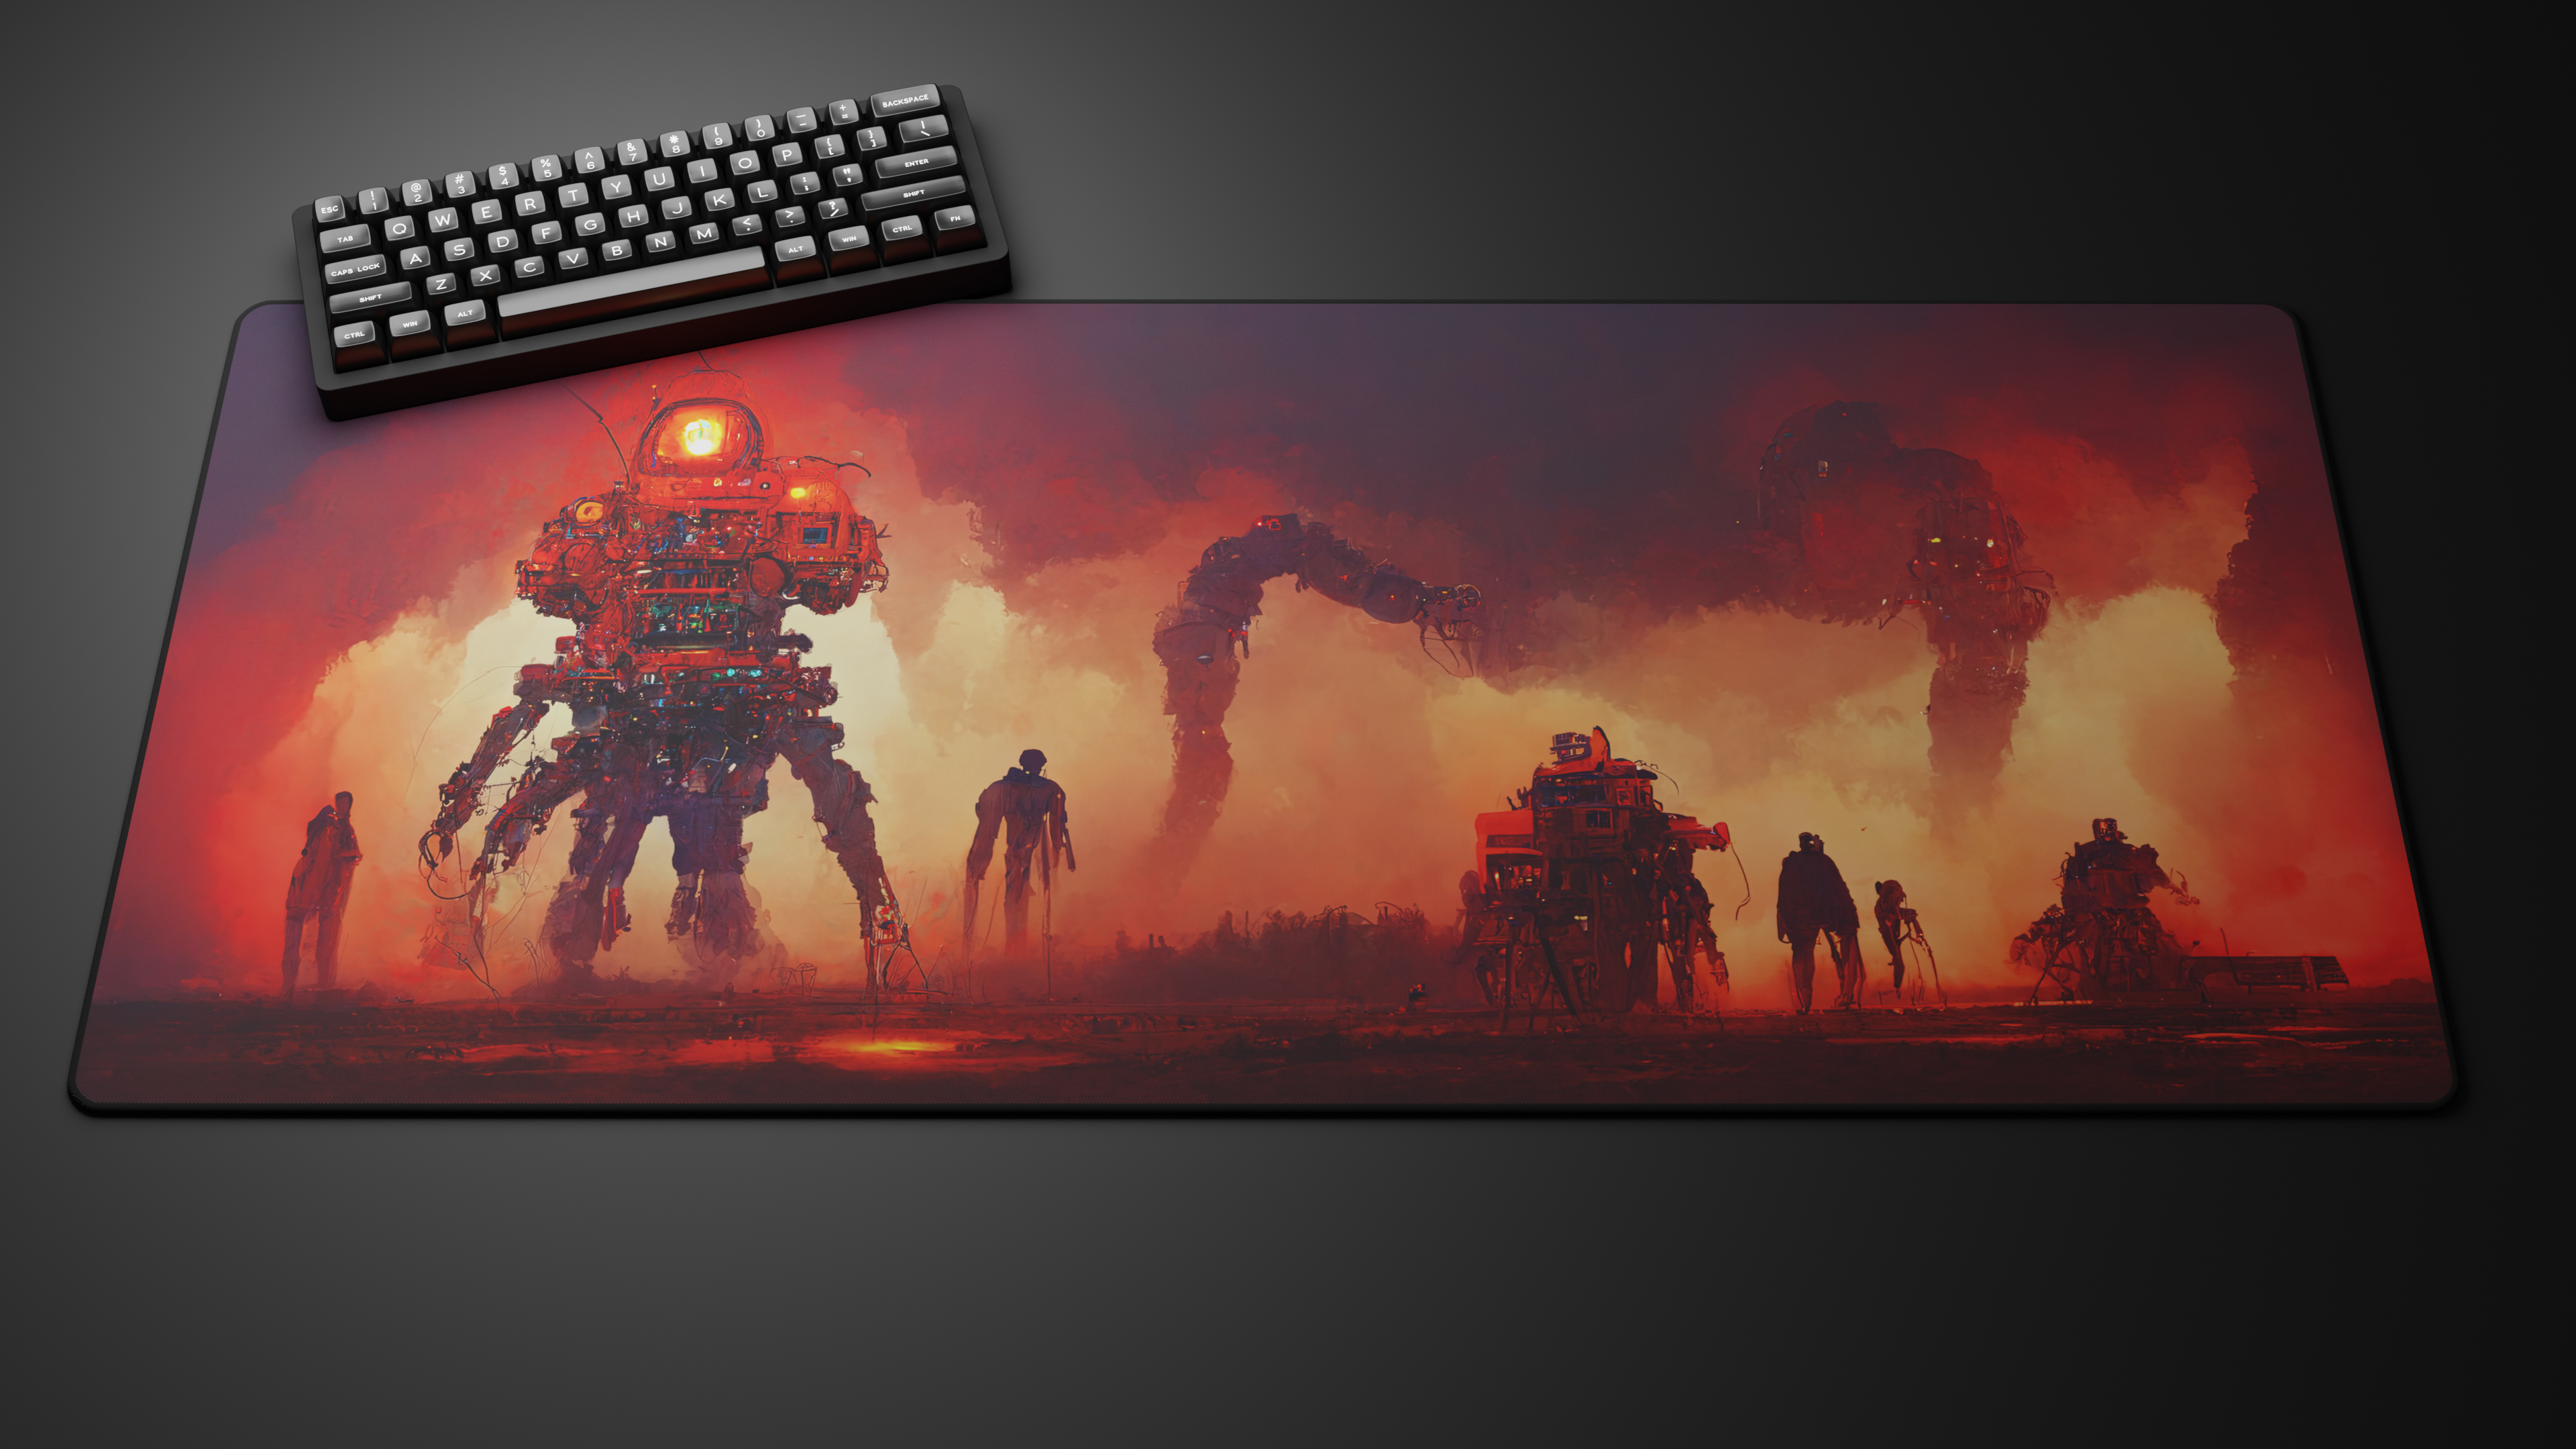 Deskmat 'AI Collection - Singularity' by glutch